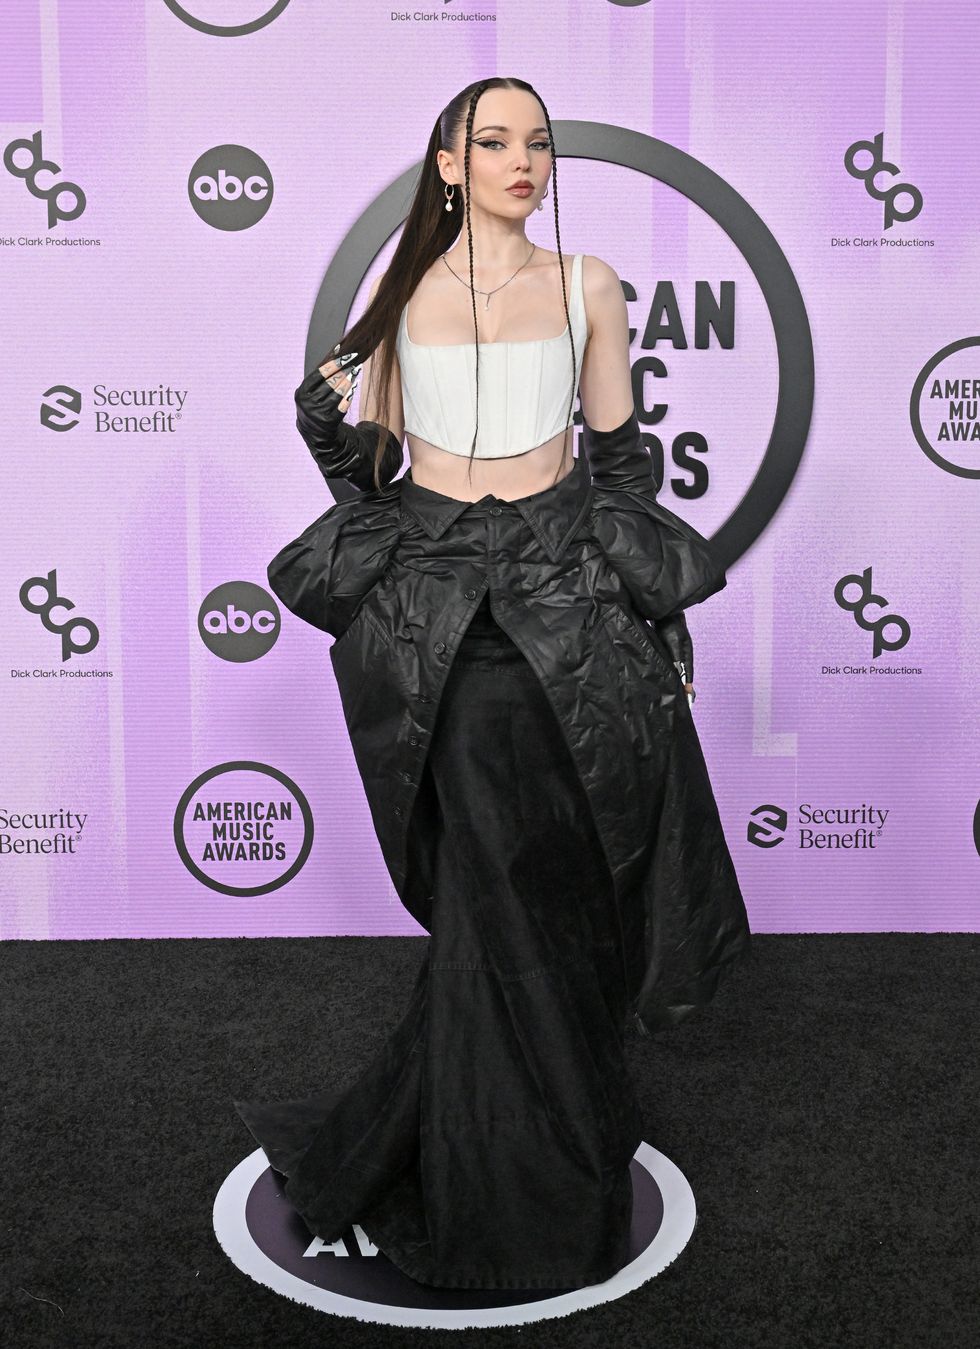 2021 American Music Awards: See All the Red Carpet Arrivals